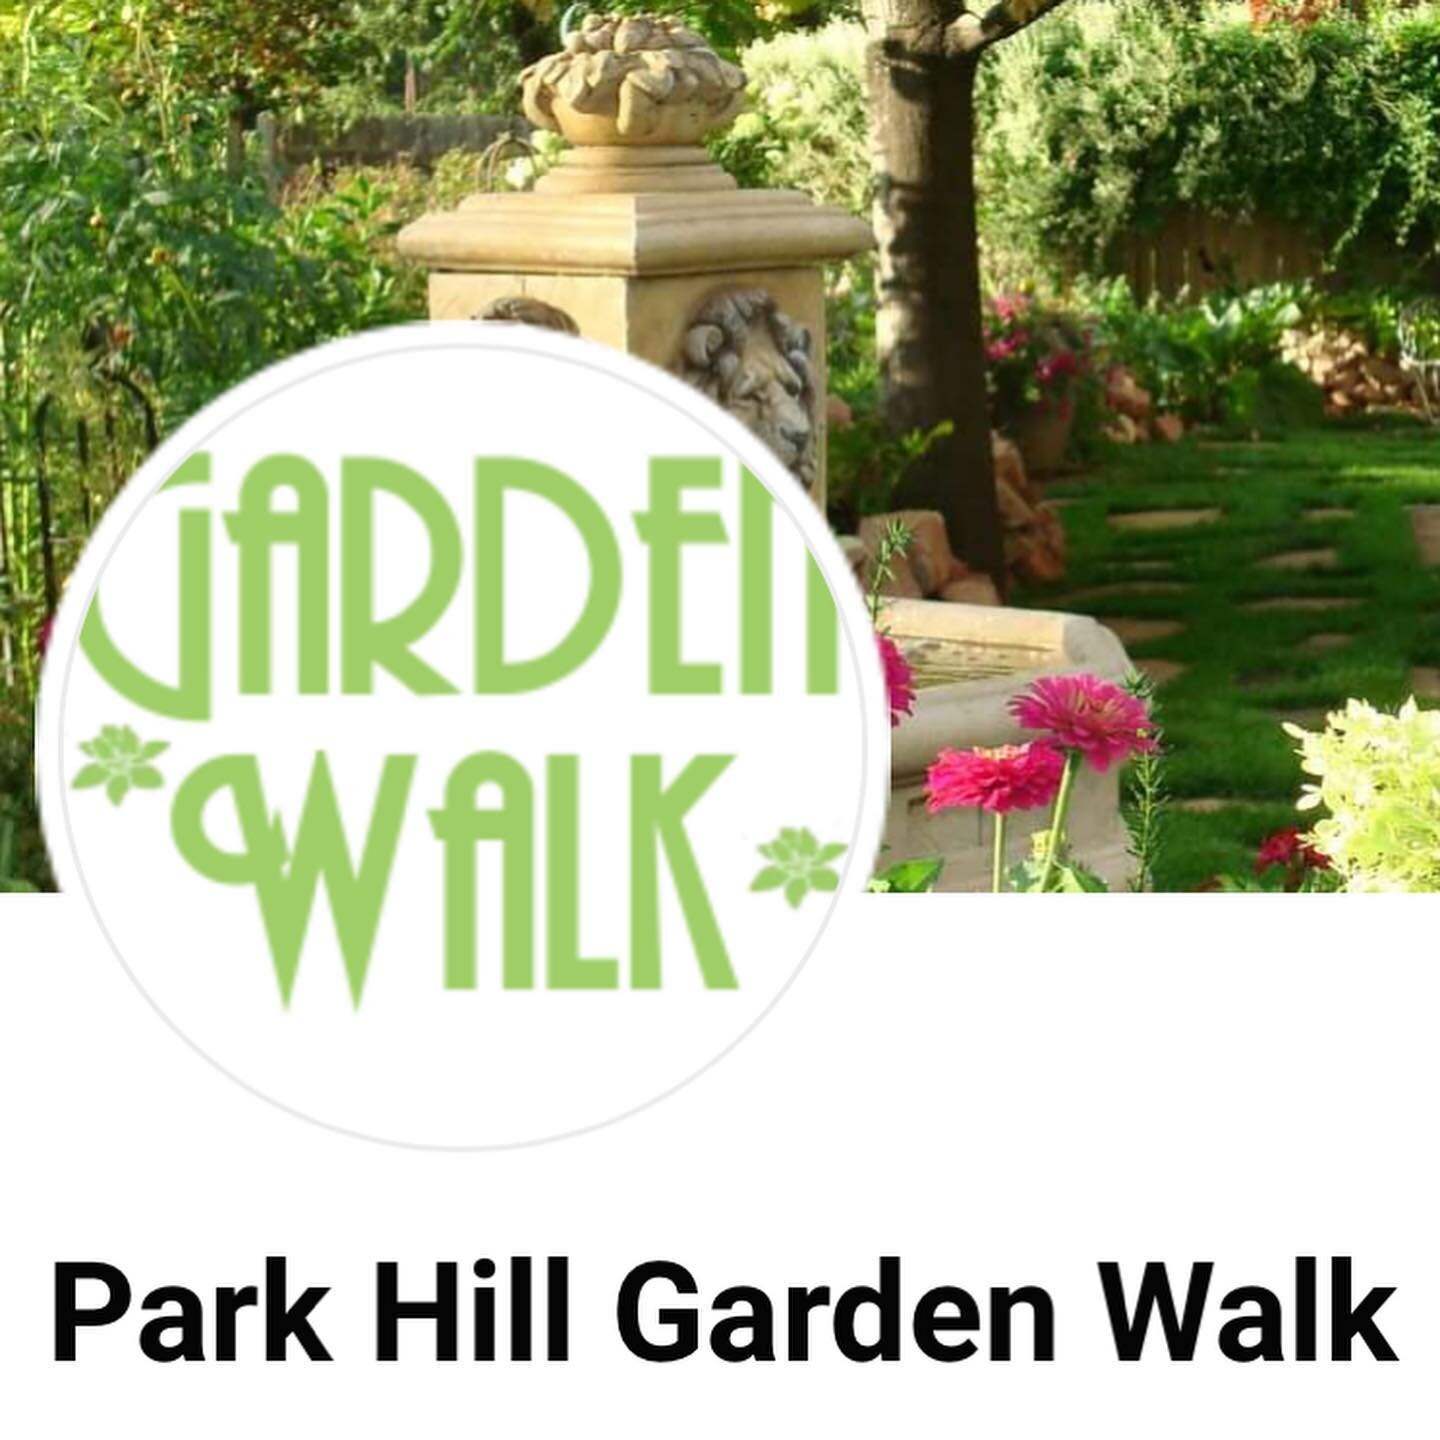 Come see me at the Park Hill Garden Walk! I was paired up with Gardner John Desmond at 1601 Filbert Court in Denver. I&rsquo;m here until Noon with my artwork and scarves. 

https://www.facebook.com/PHGardenWalk?mibextid=LQQJ4d 

#art #denverart #col